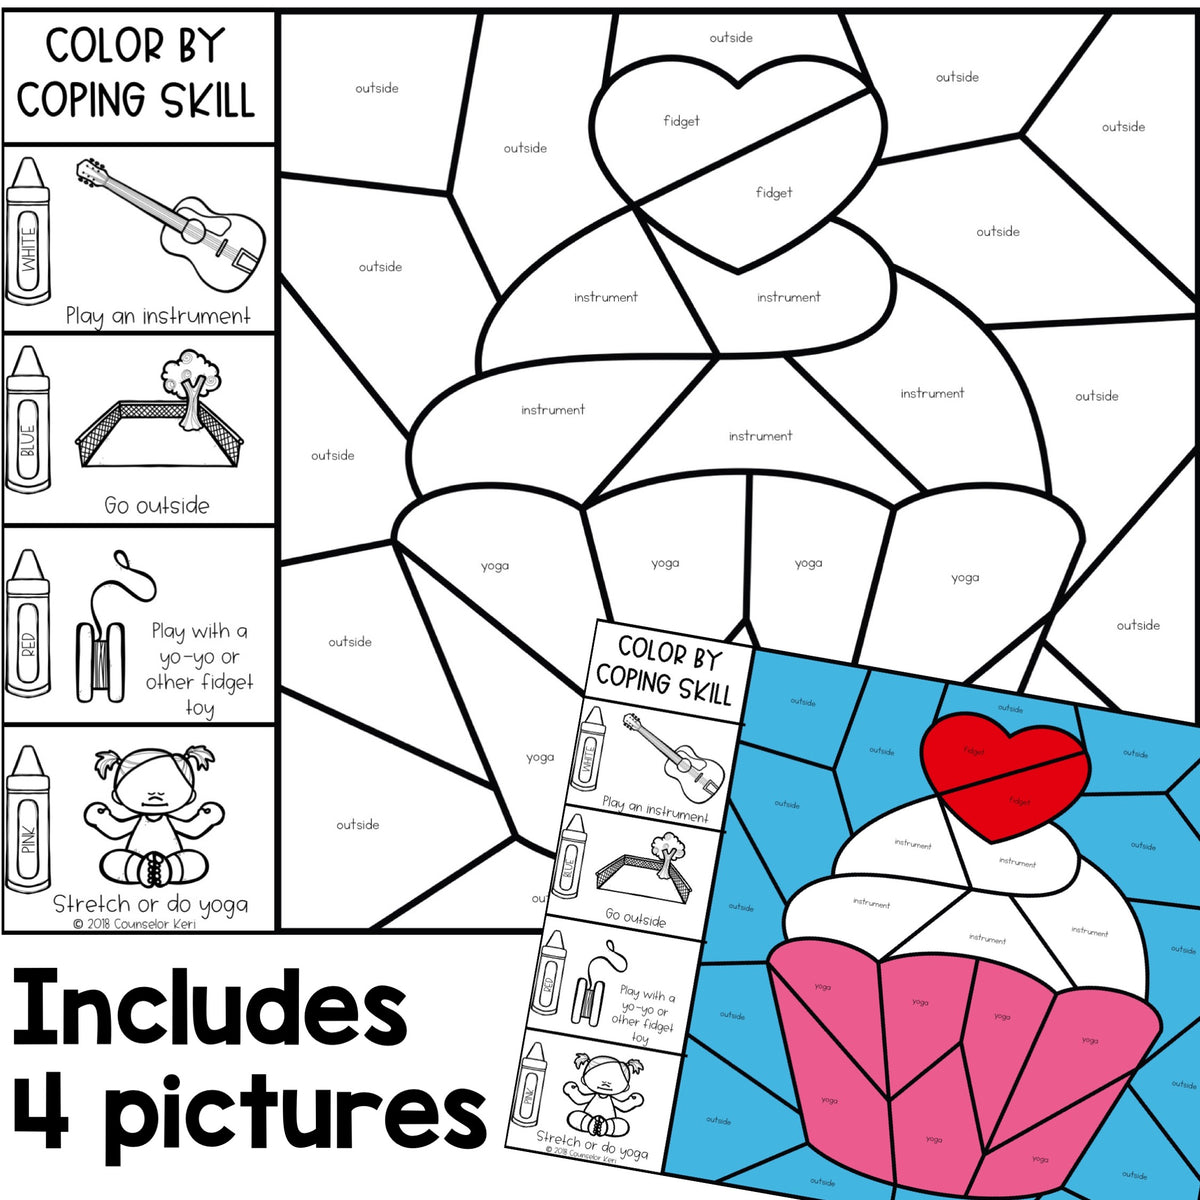 color-by-coping-skills-valentine-s-day-activity-for-elementary-school